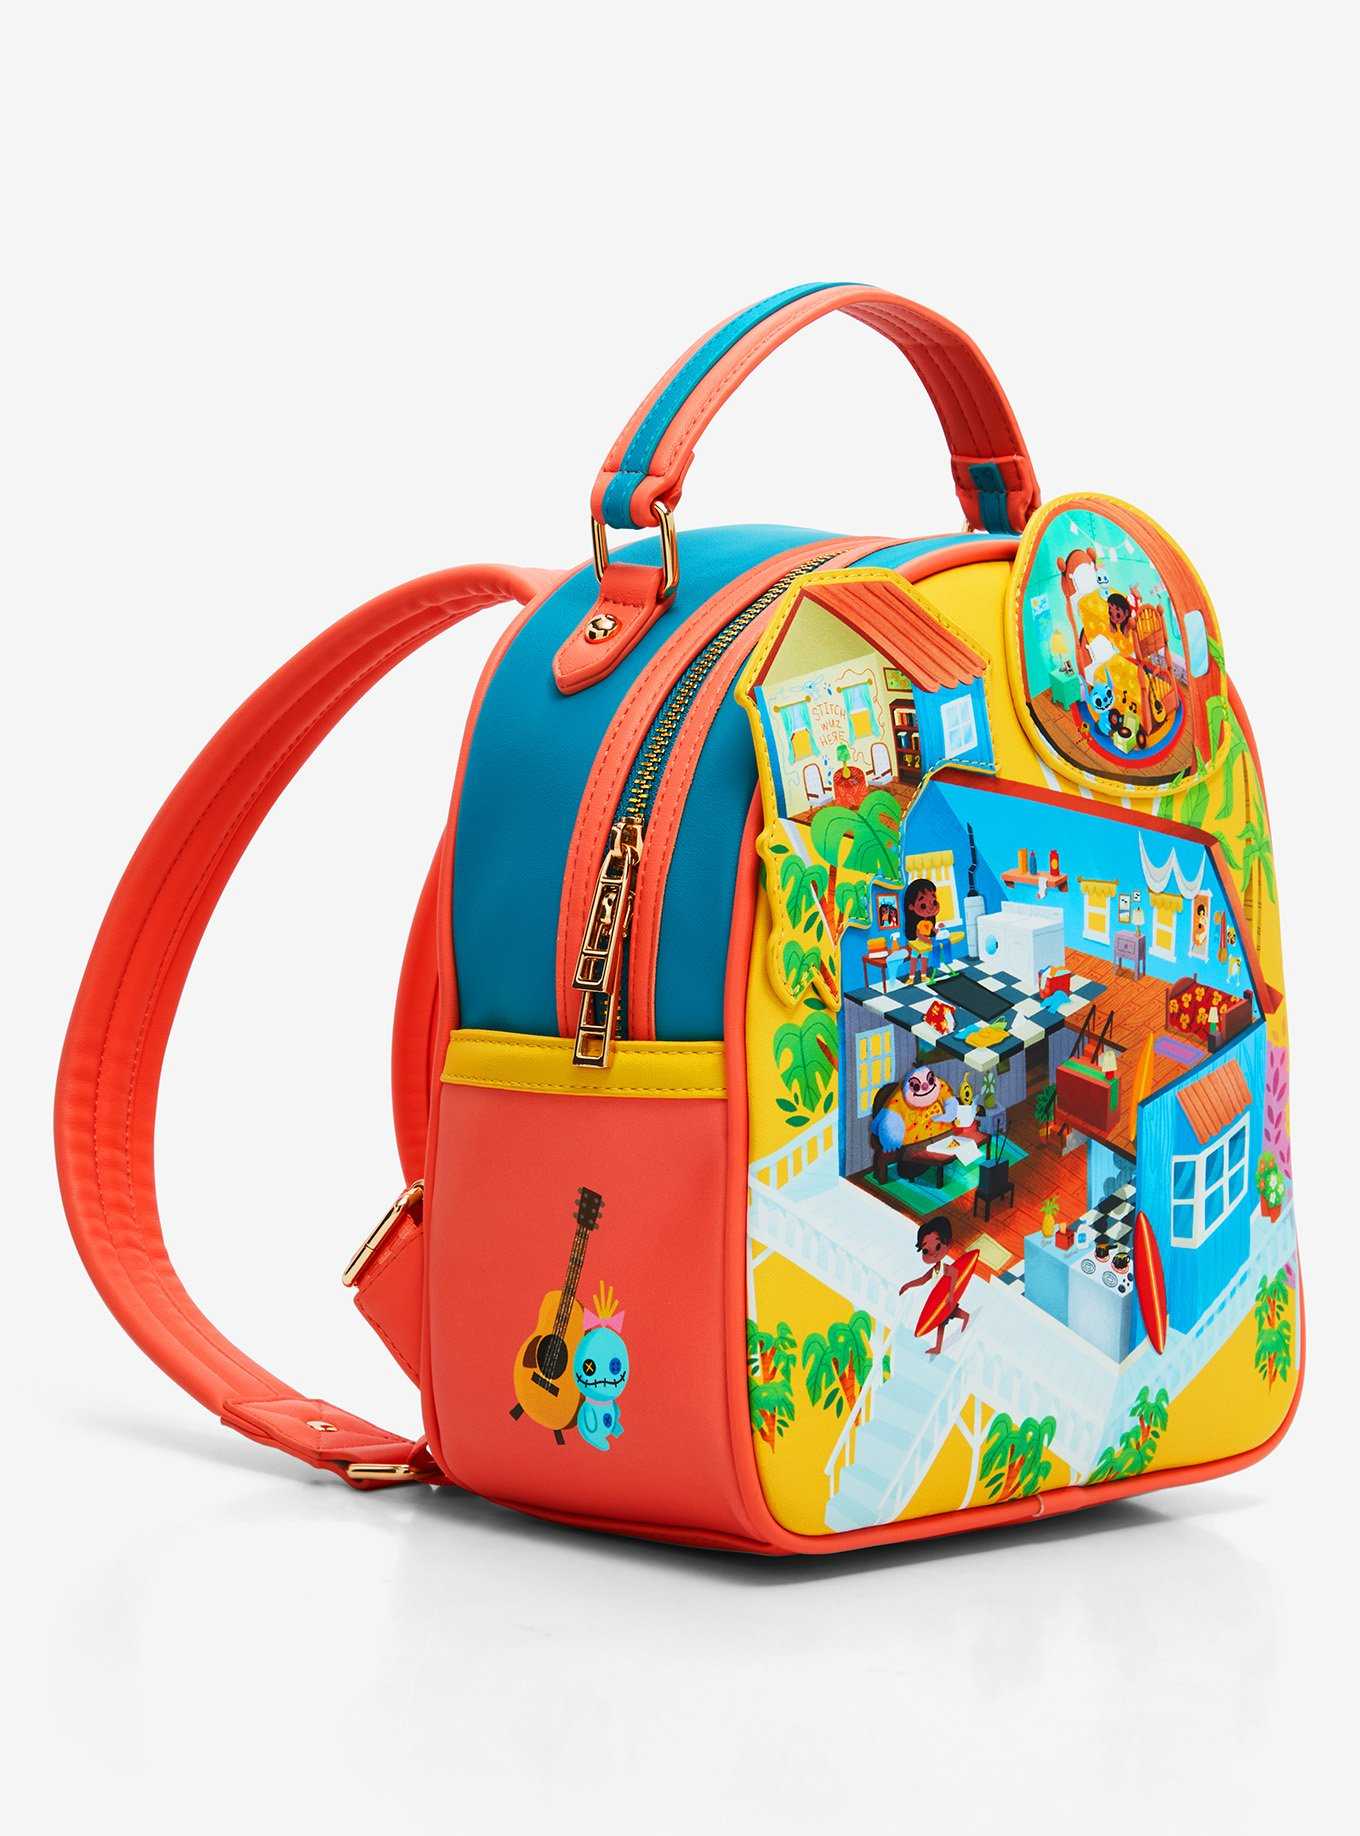 Disney Lilo & Stitch Isometric House Mini Backpack - BoxLunch Exclusive, , hi-res